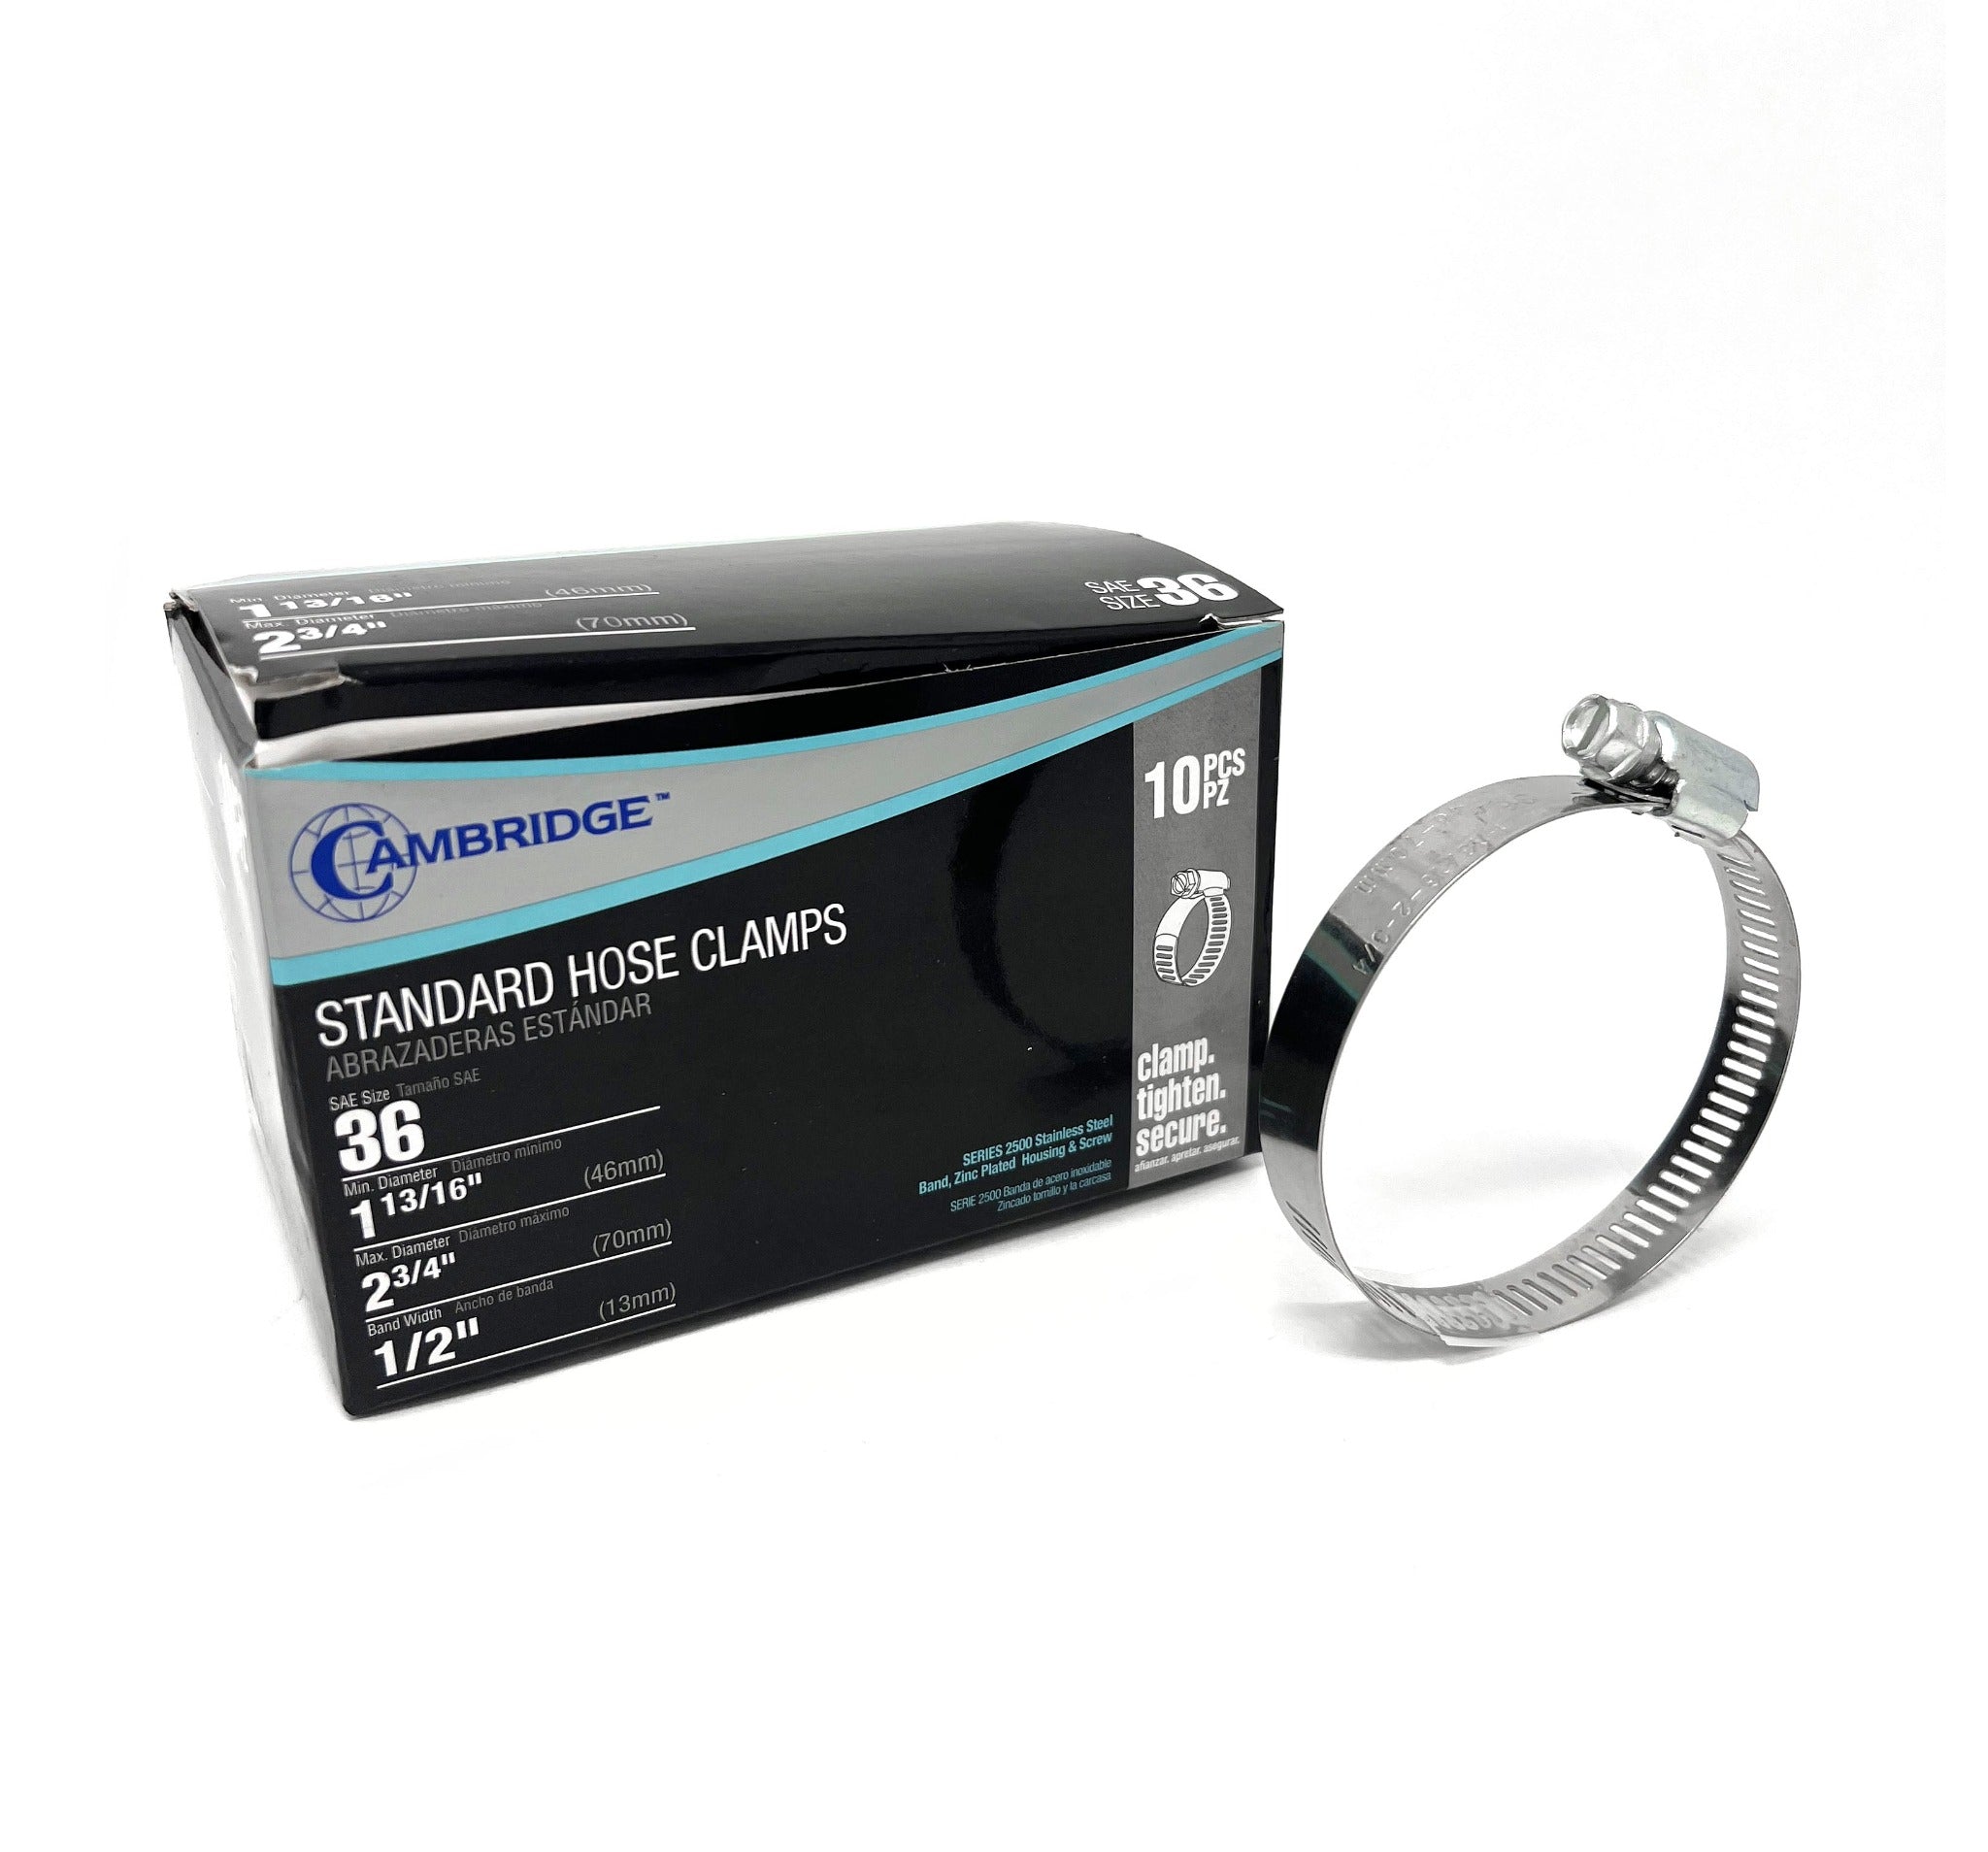 #36 1 13/16 TO 2 3/4 STANDARD HOSE CLAMP (Box of 10)